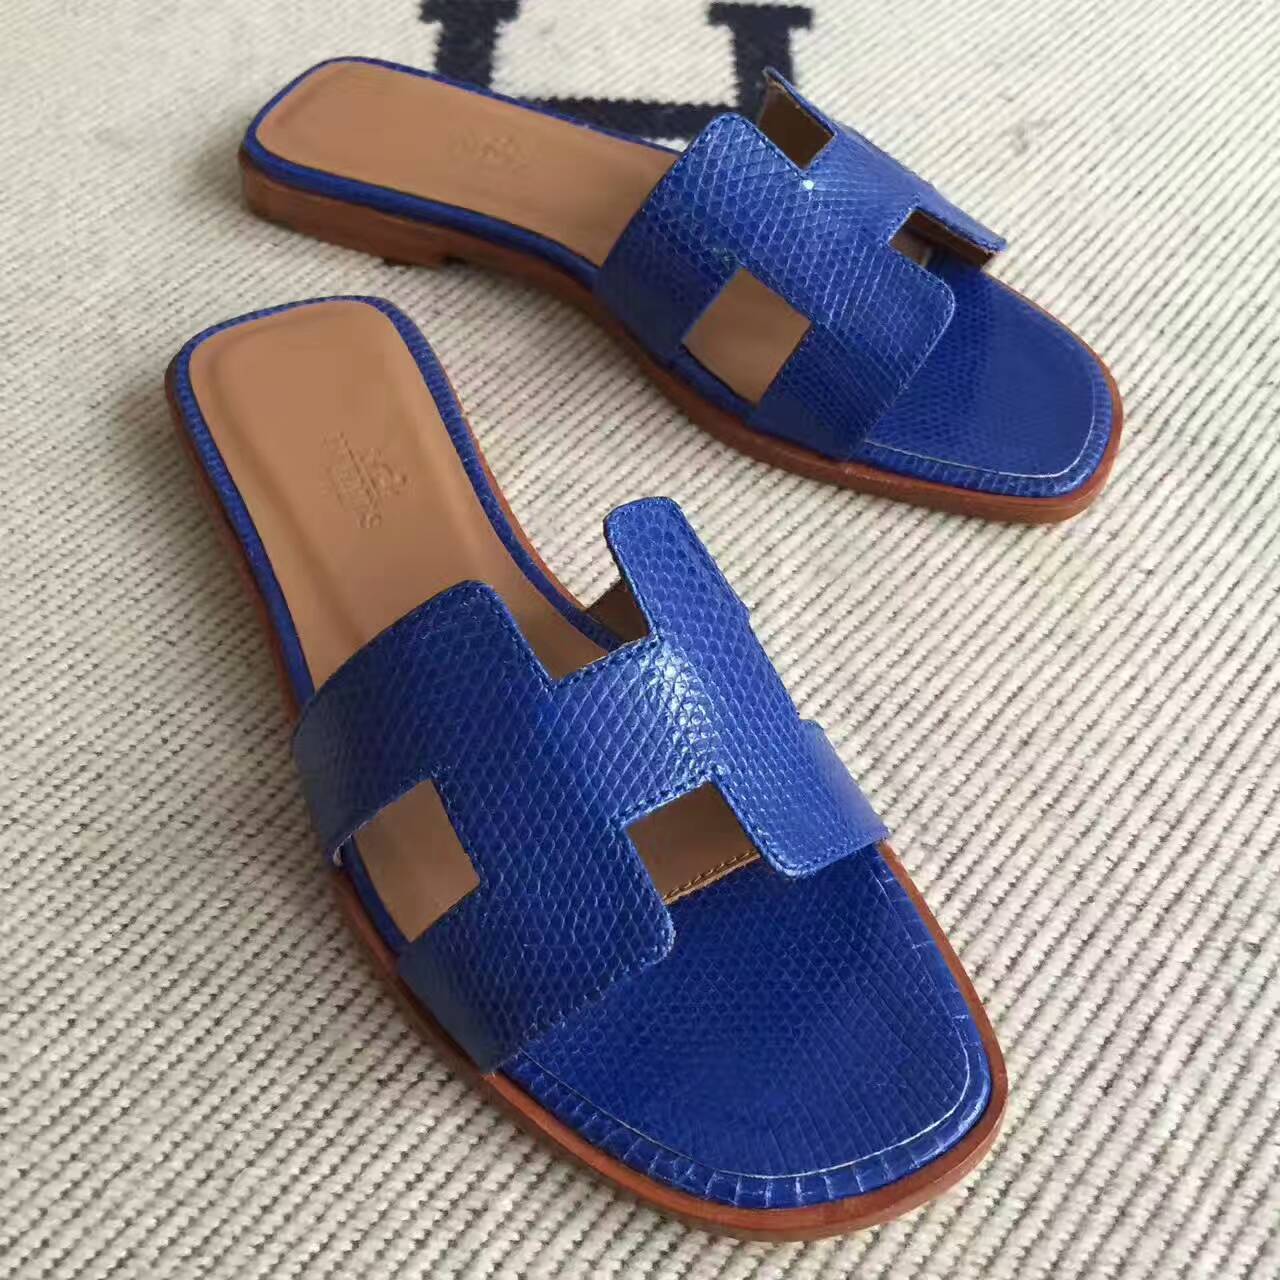 Discount Hermes Lizard Skin Sandals Shoes in 7T Blue Electric Size35-42